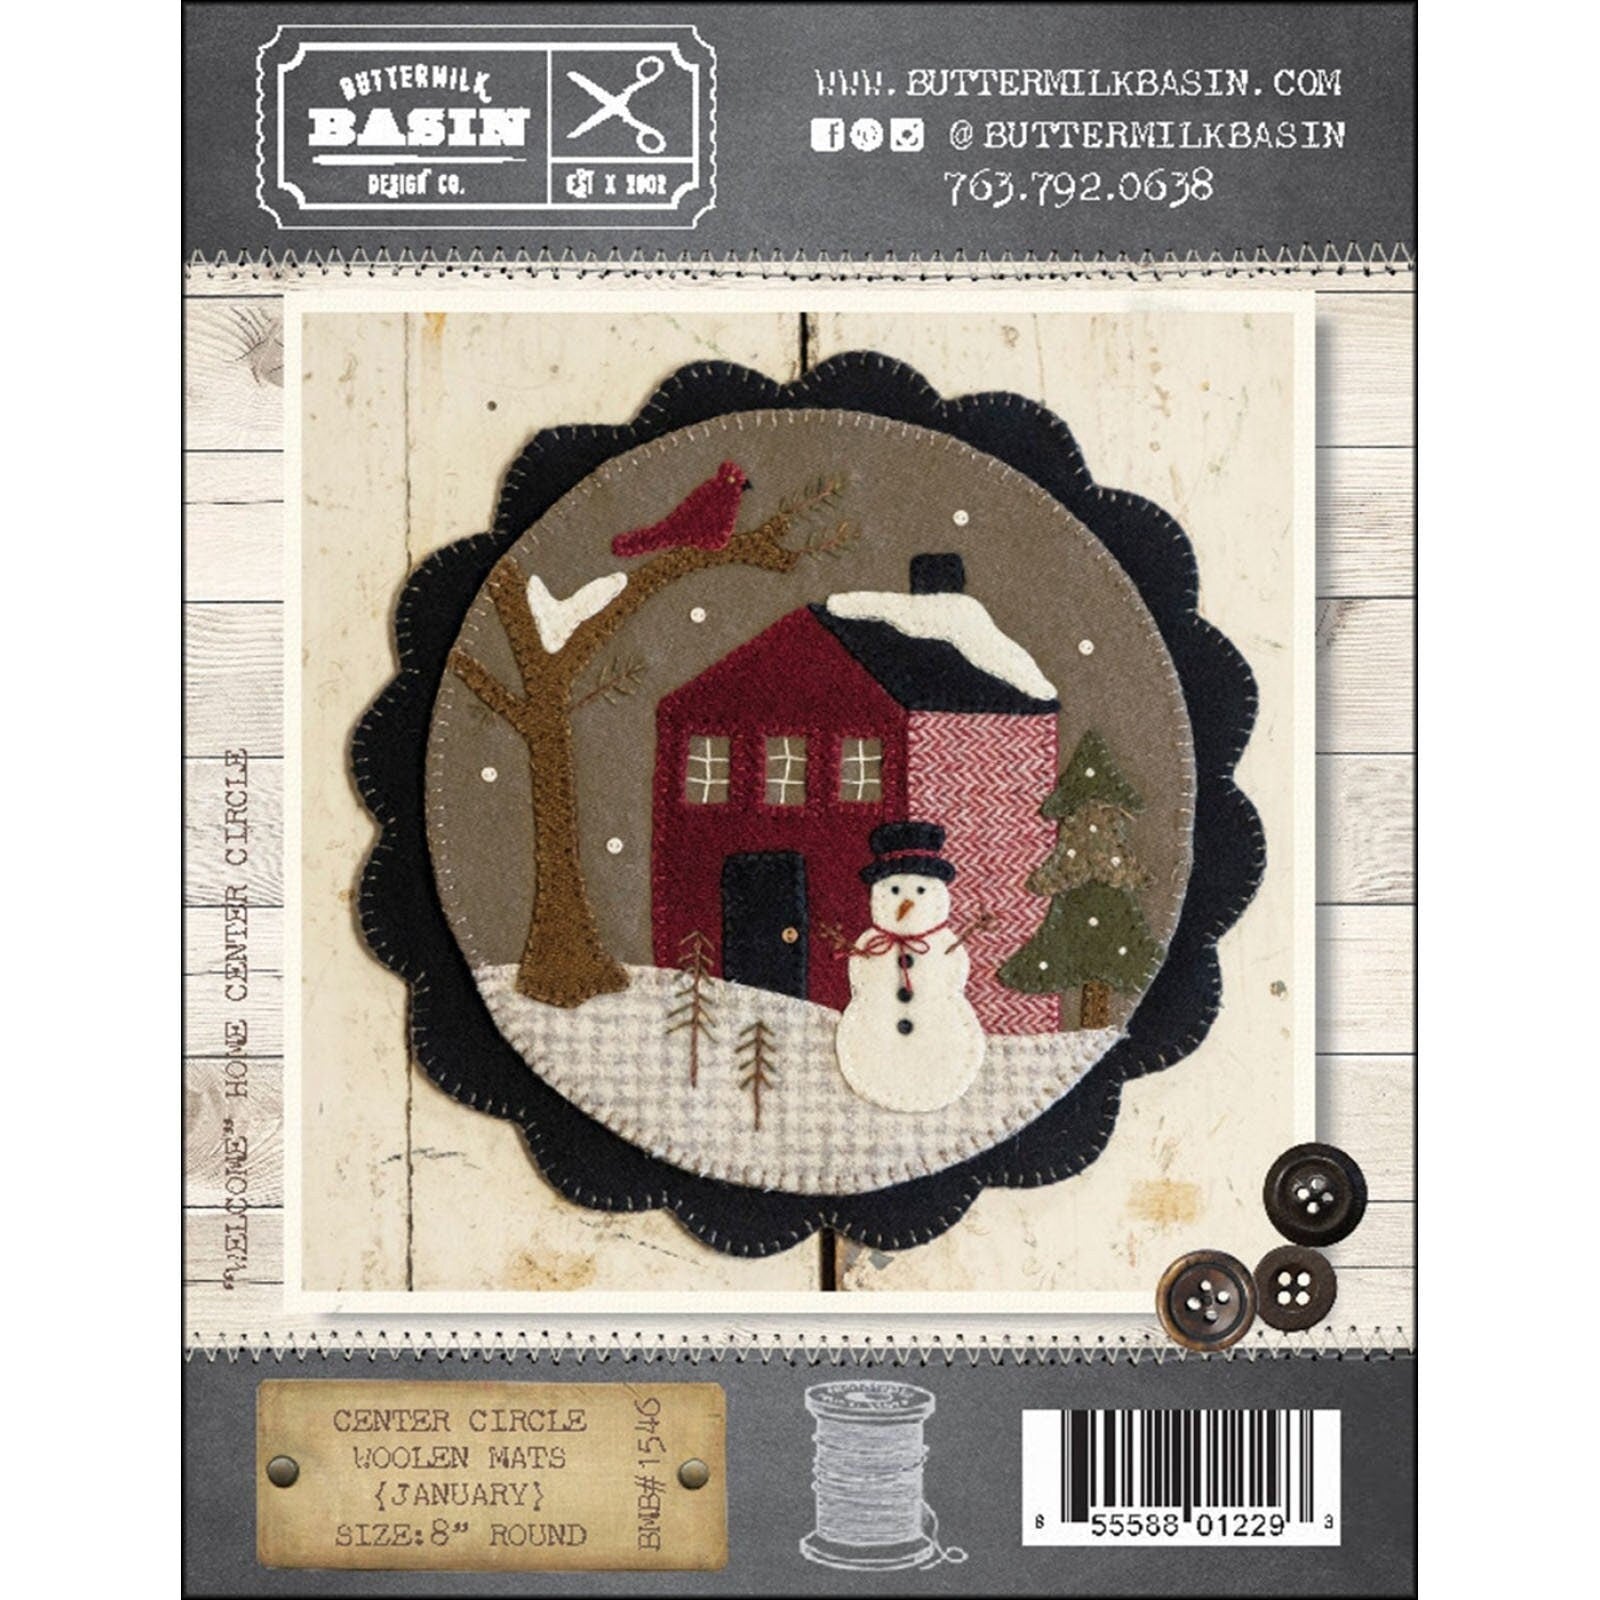 Welcome Home Banner with Center Circle Woolen Mats Block of the Month Quilt Patterns